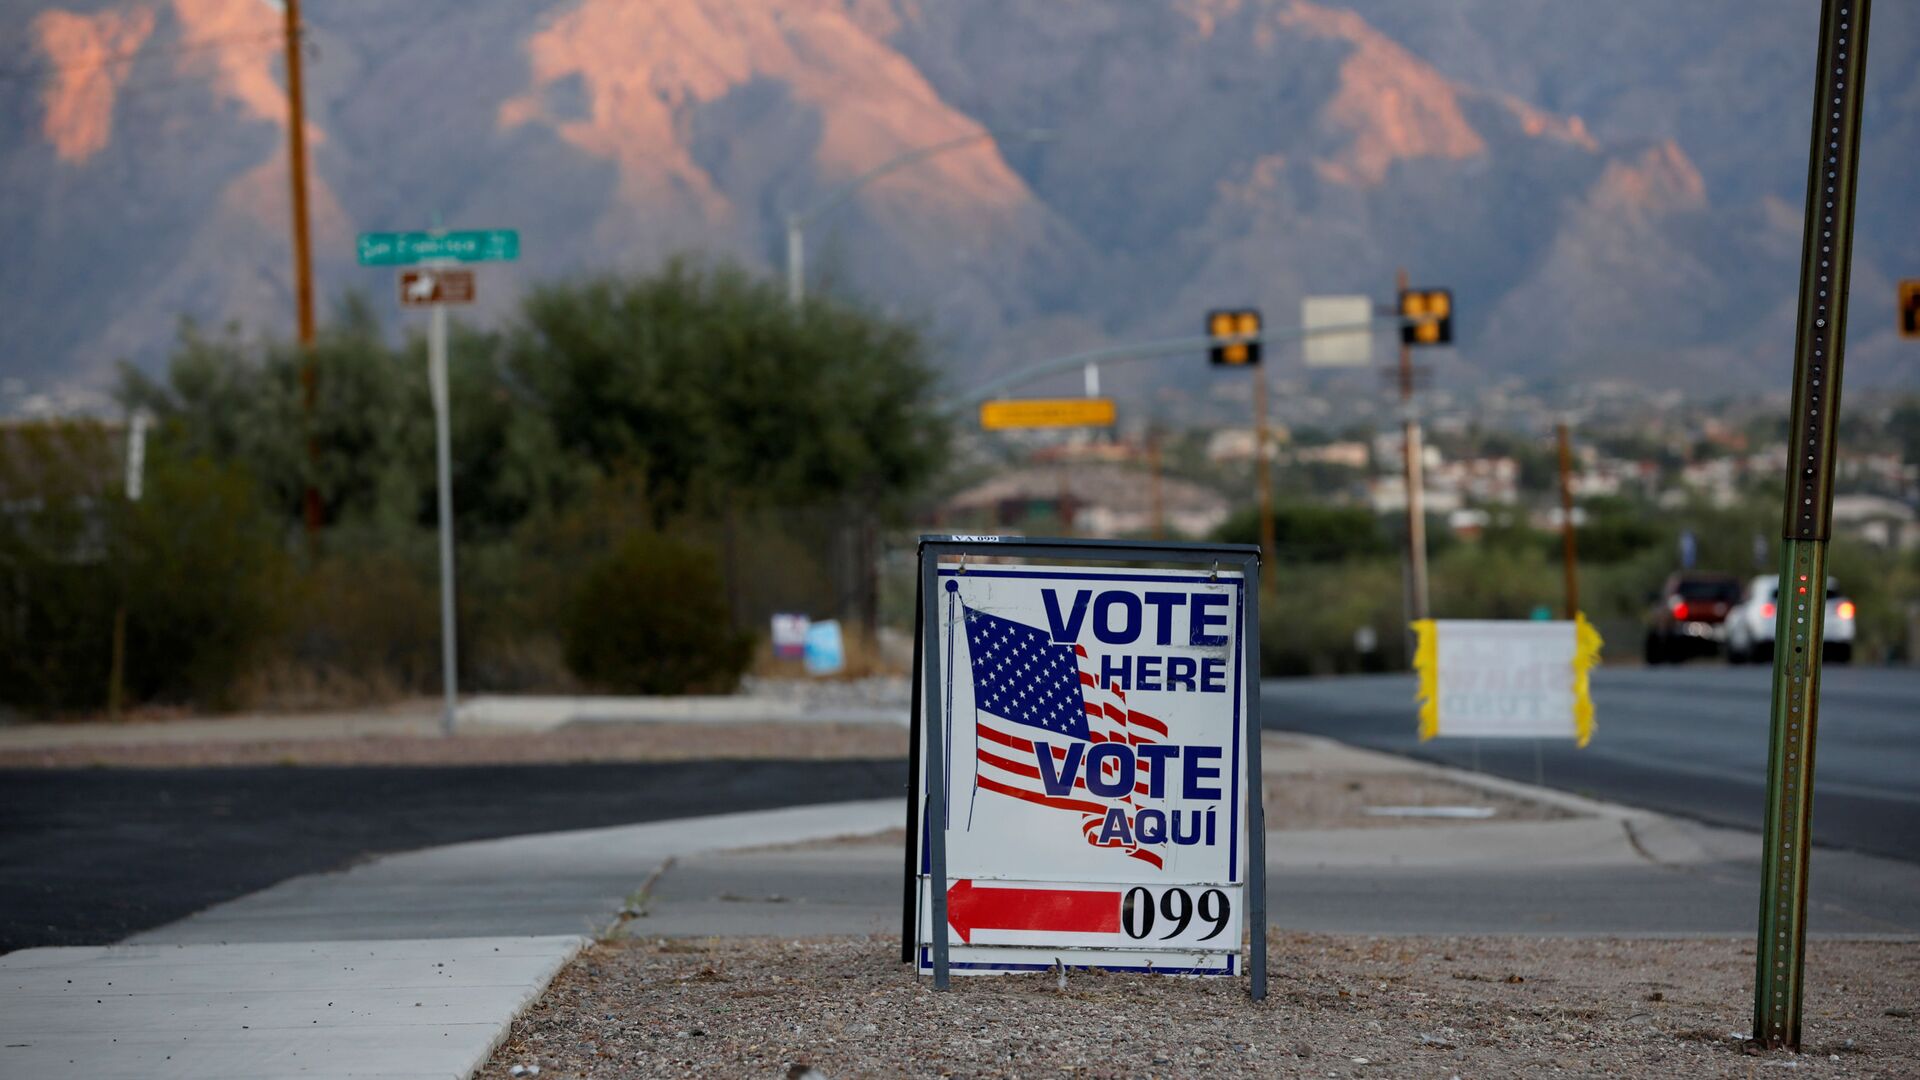 Sign directs voters to a polling station on Election Day in Tucson, Arizona, U.S. November 3, 2020 - Sputnik International, 1920, 16.10.2021